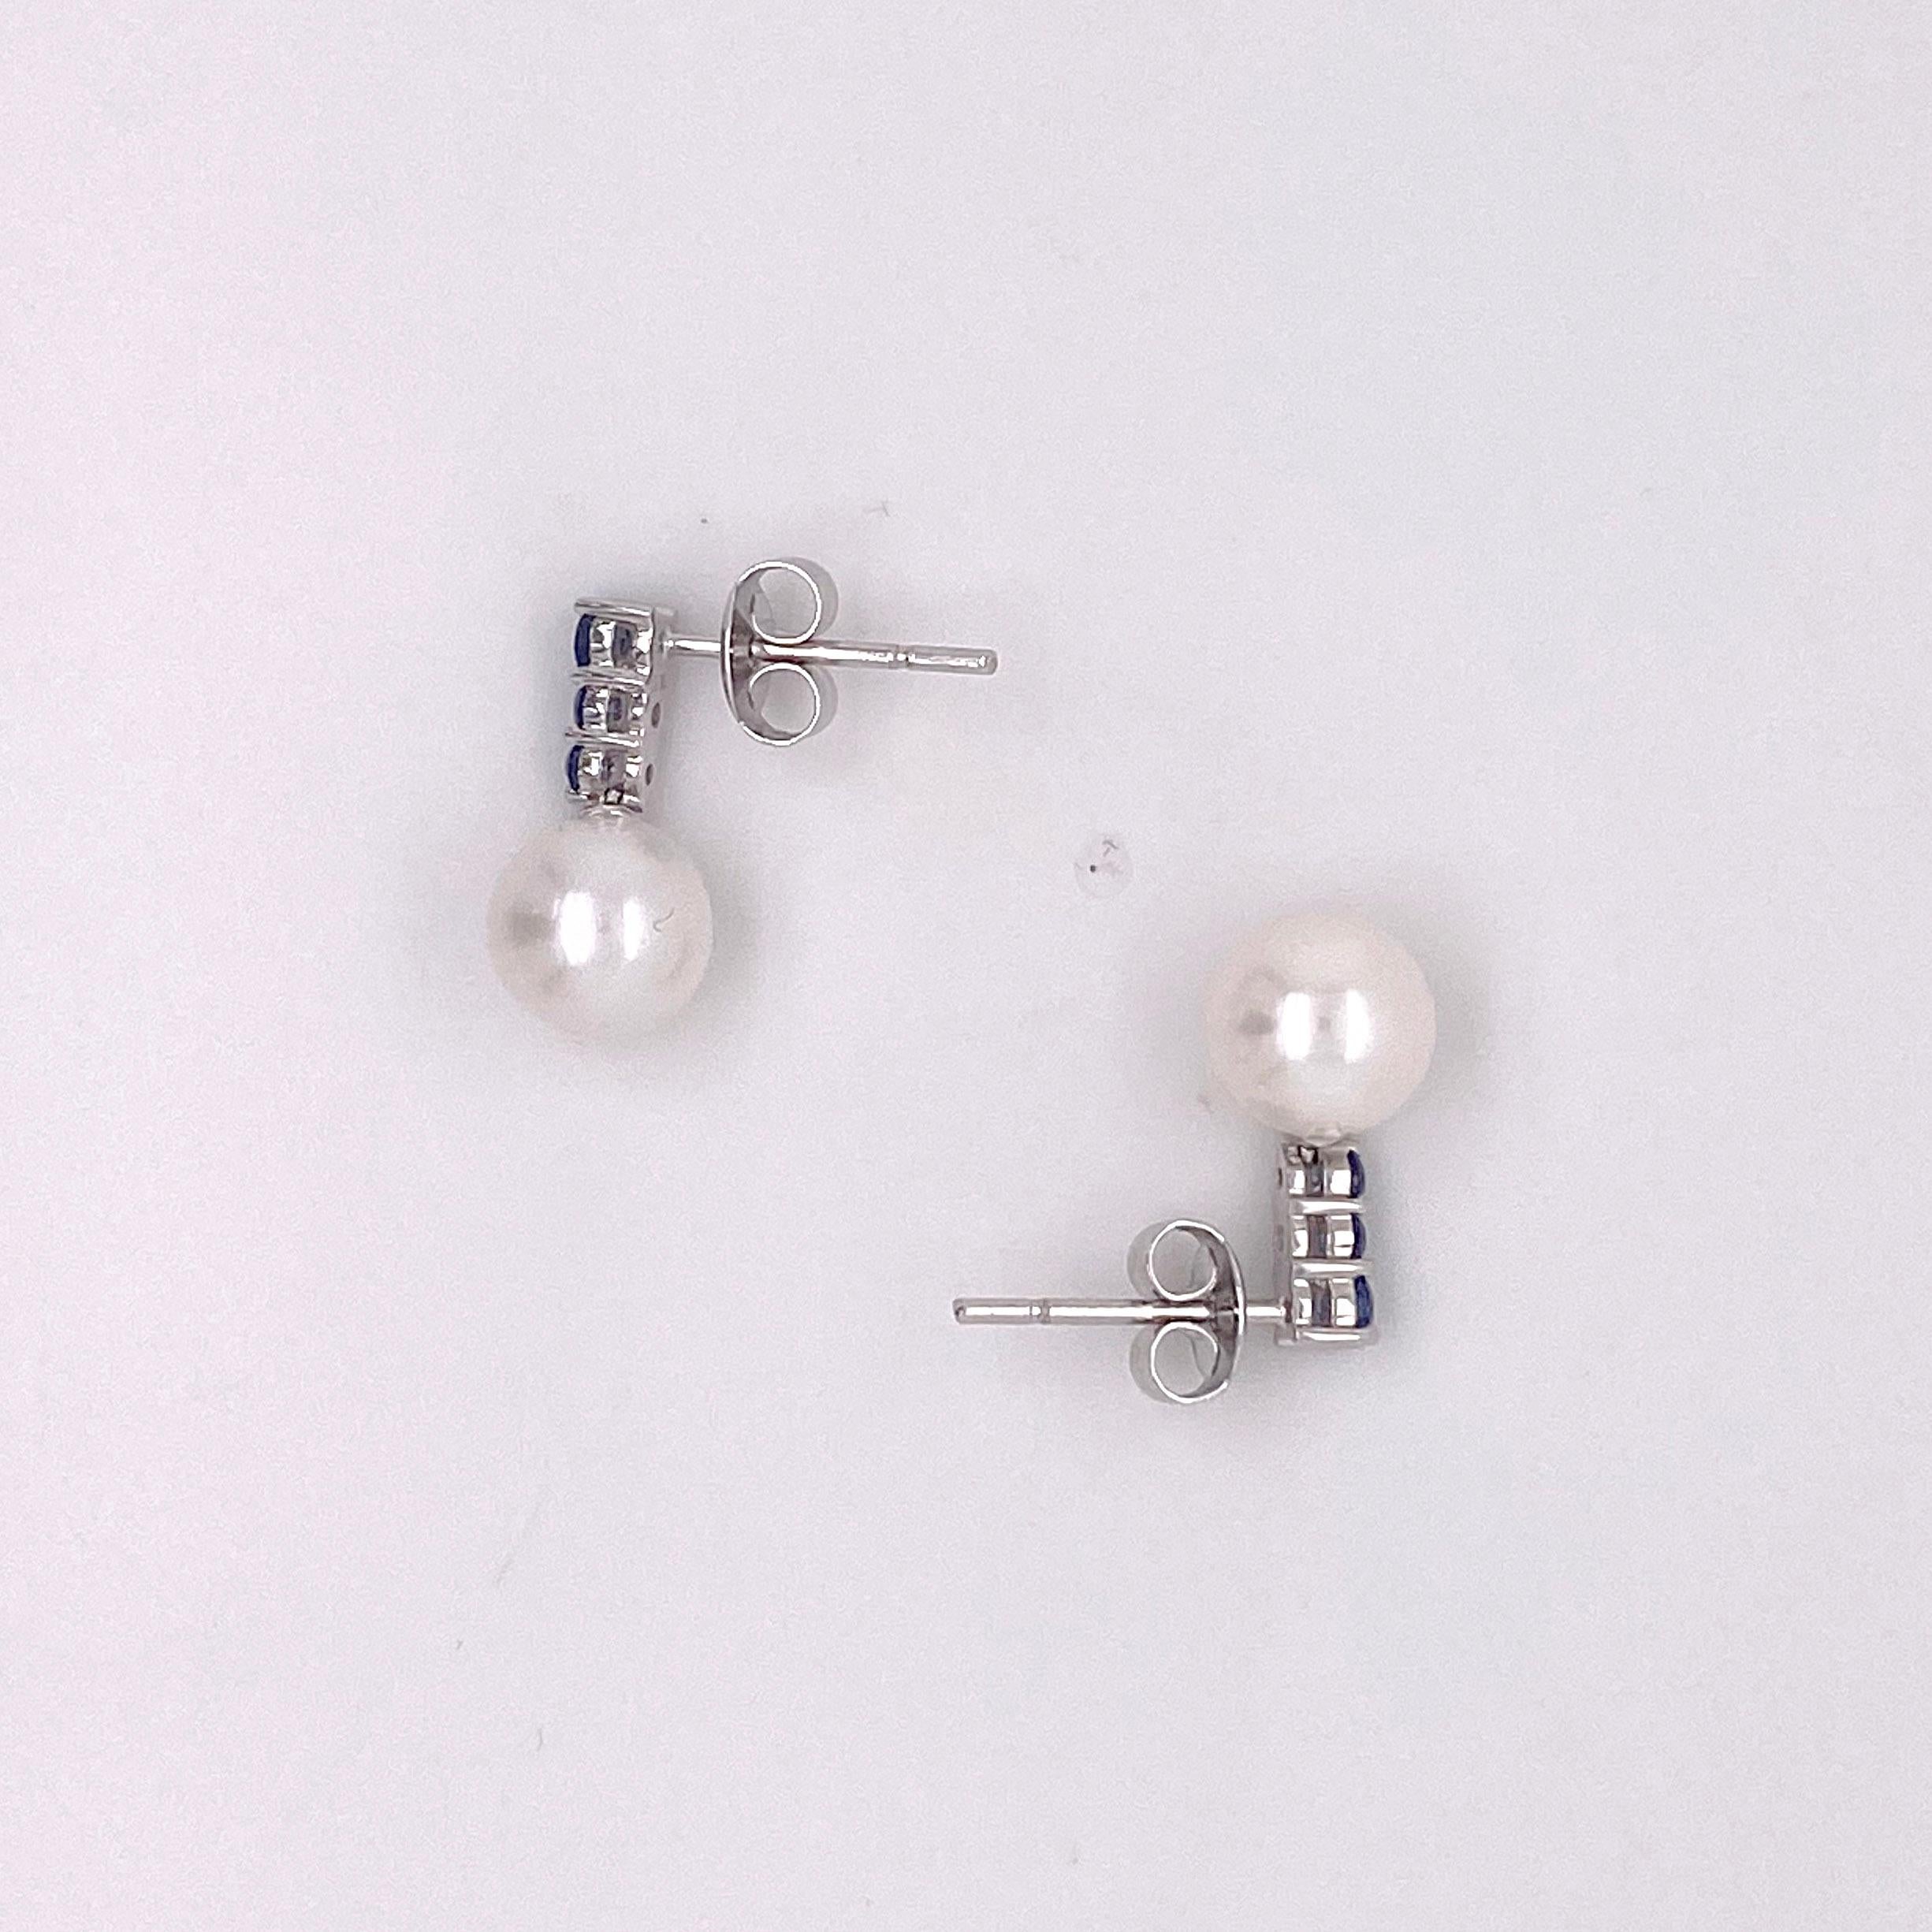 Round Cut Sapphire Pearl Earring, Earring Drops in White Gold, Event or Everyday Earrings